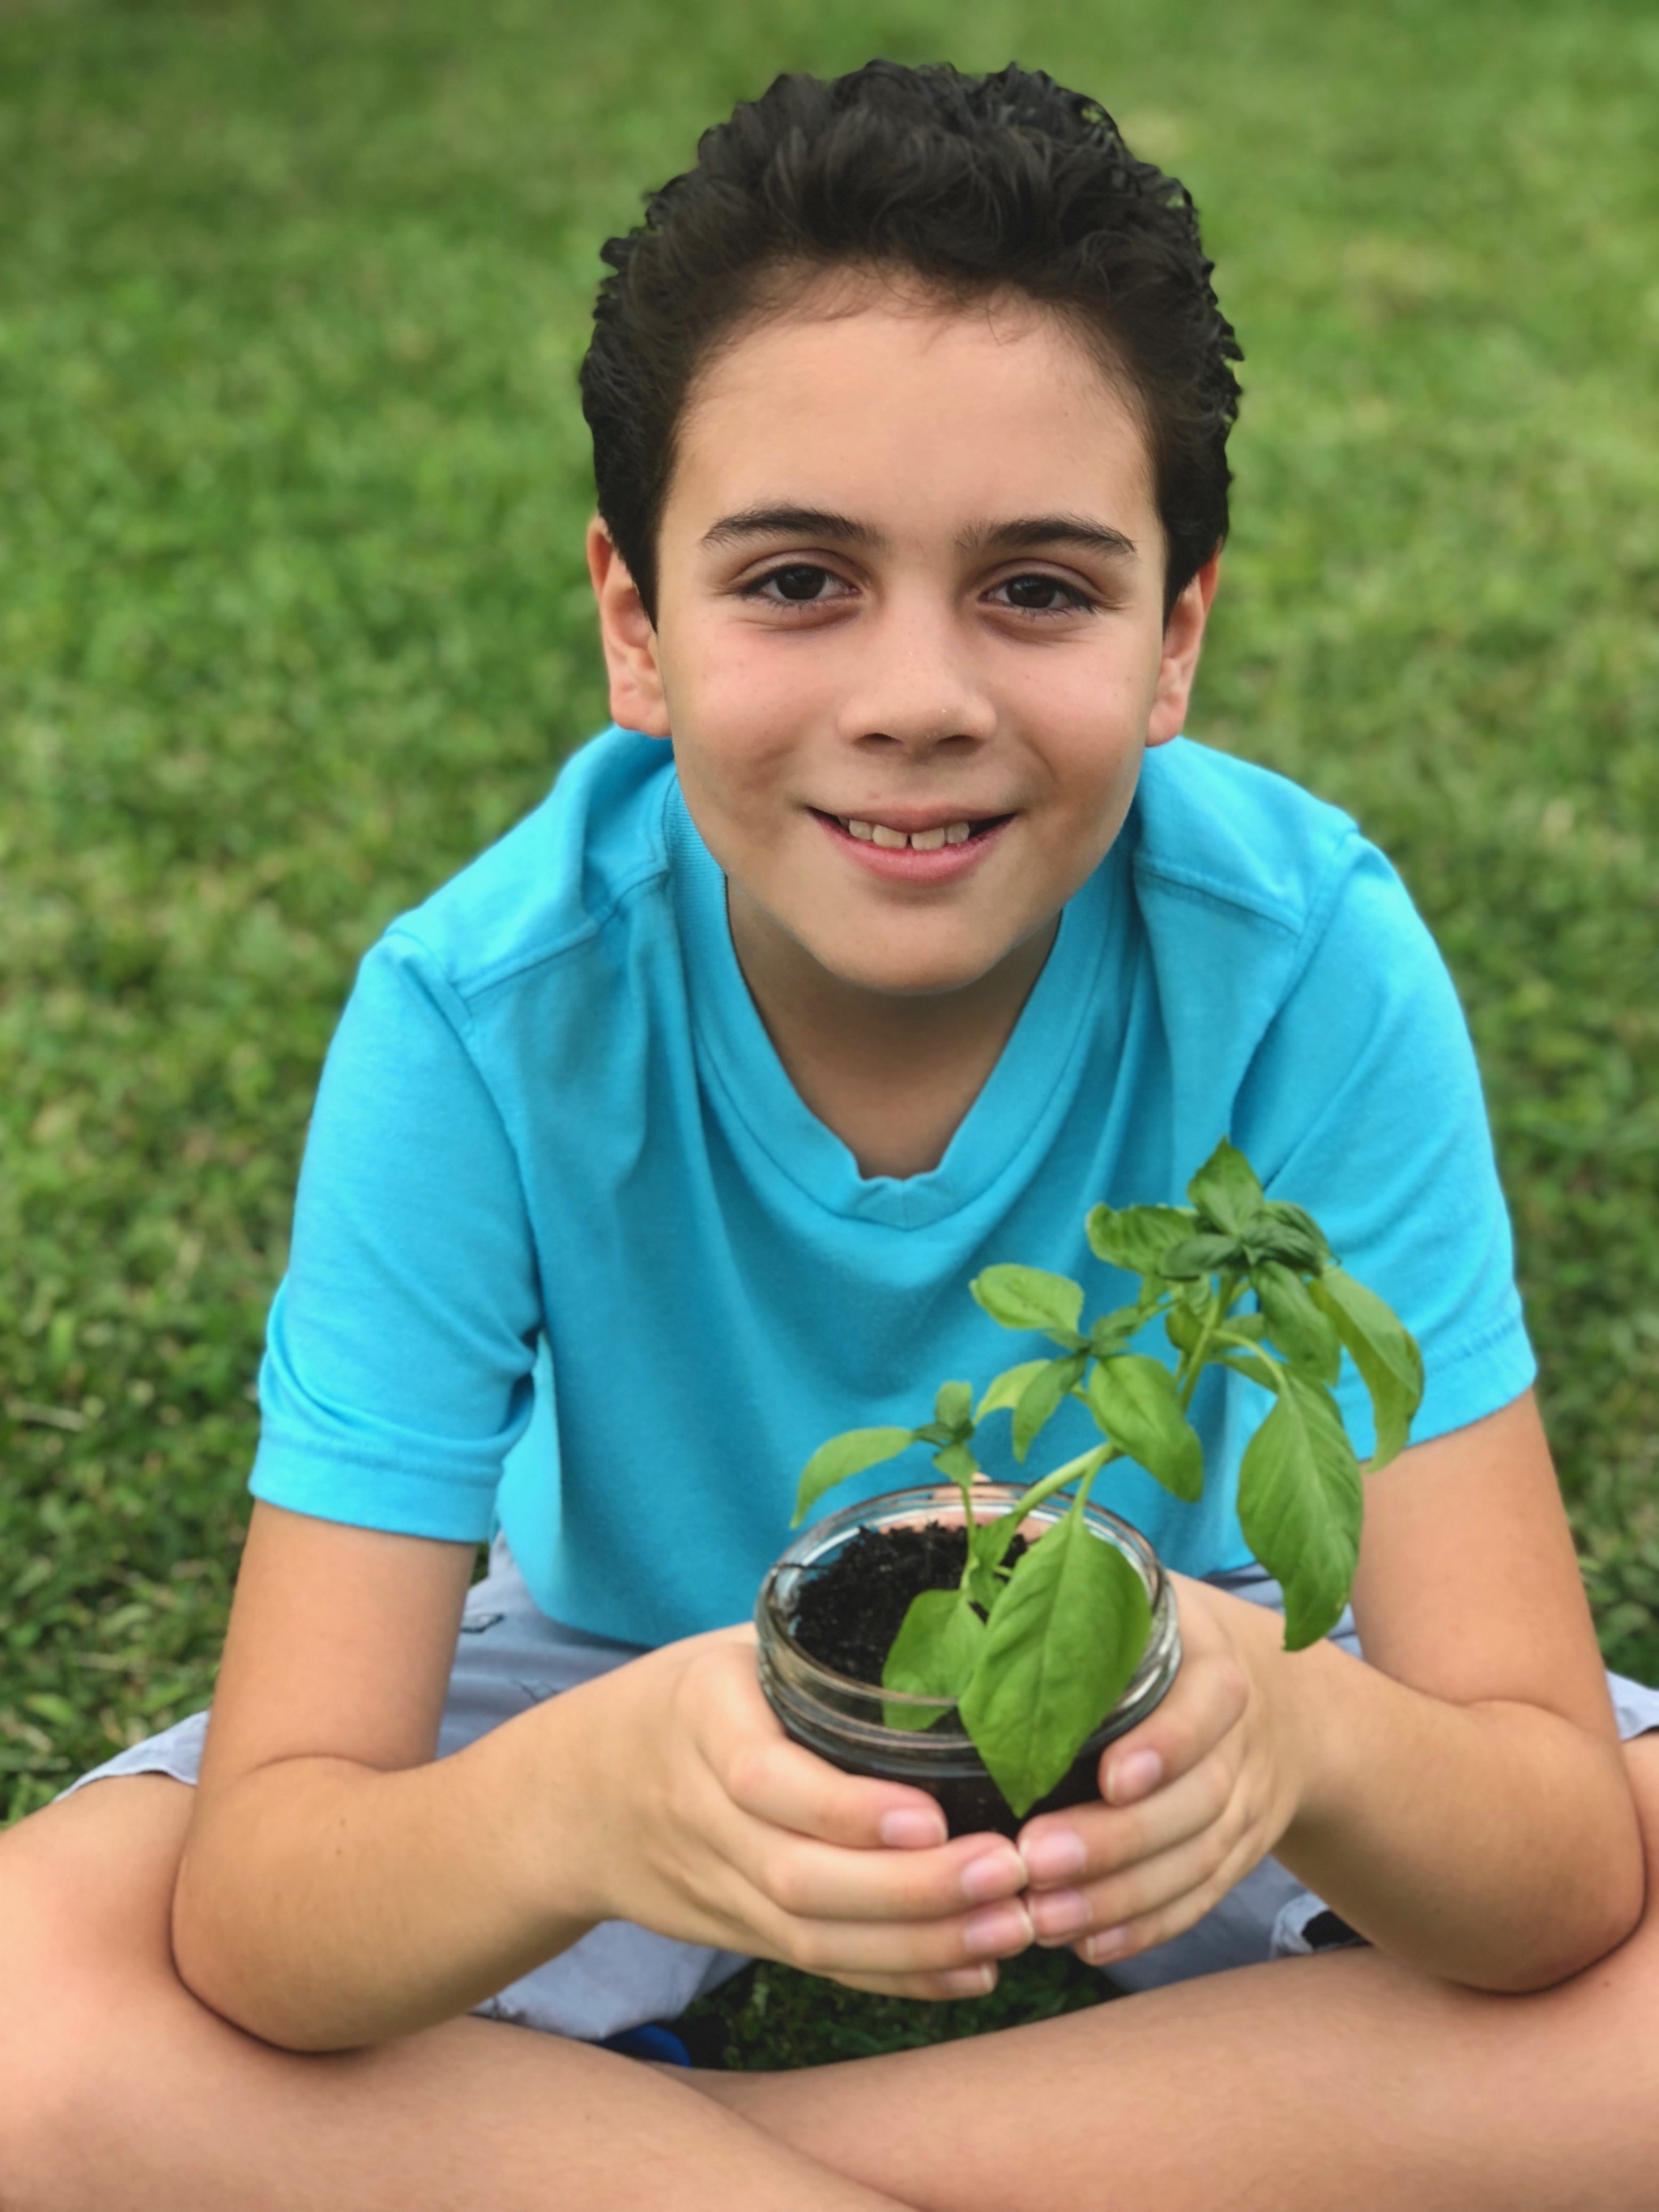 Growing Your Own Herbs and Other Fun Hands-On STEM Projects for Kids